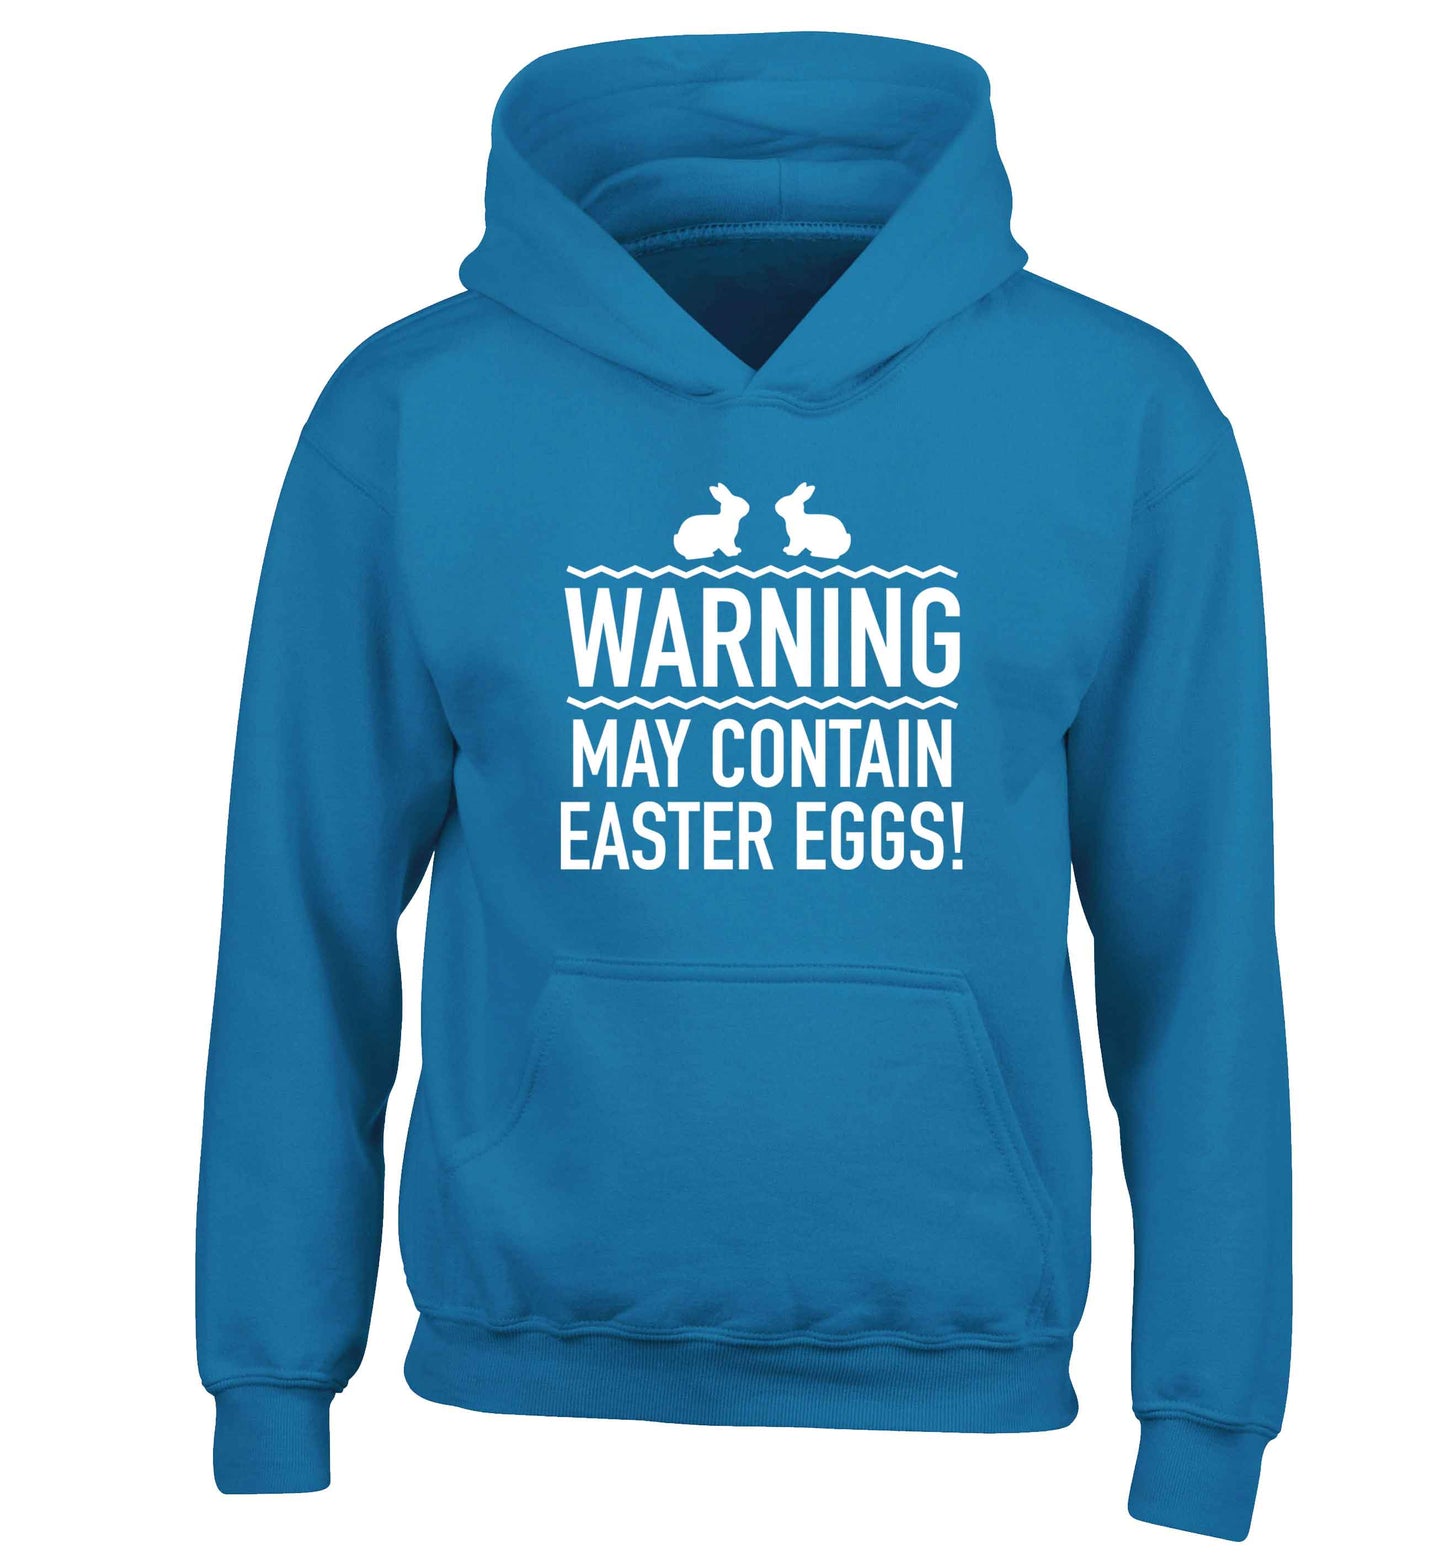 Warning may contain Easter eggs children's blue hoodie 12-13 Years